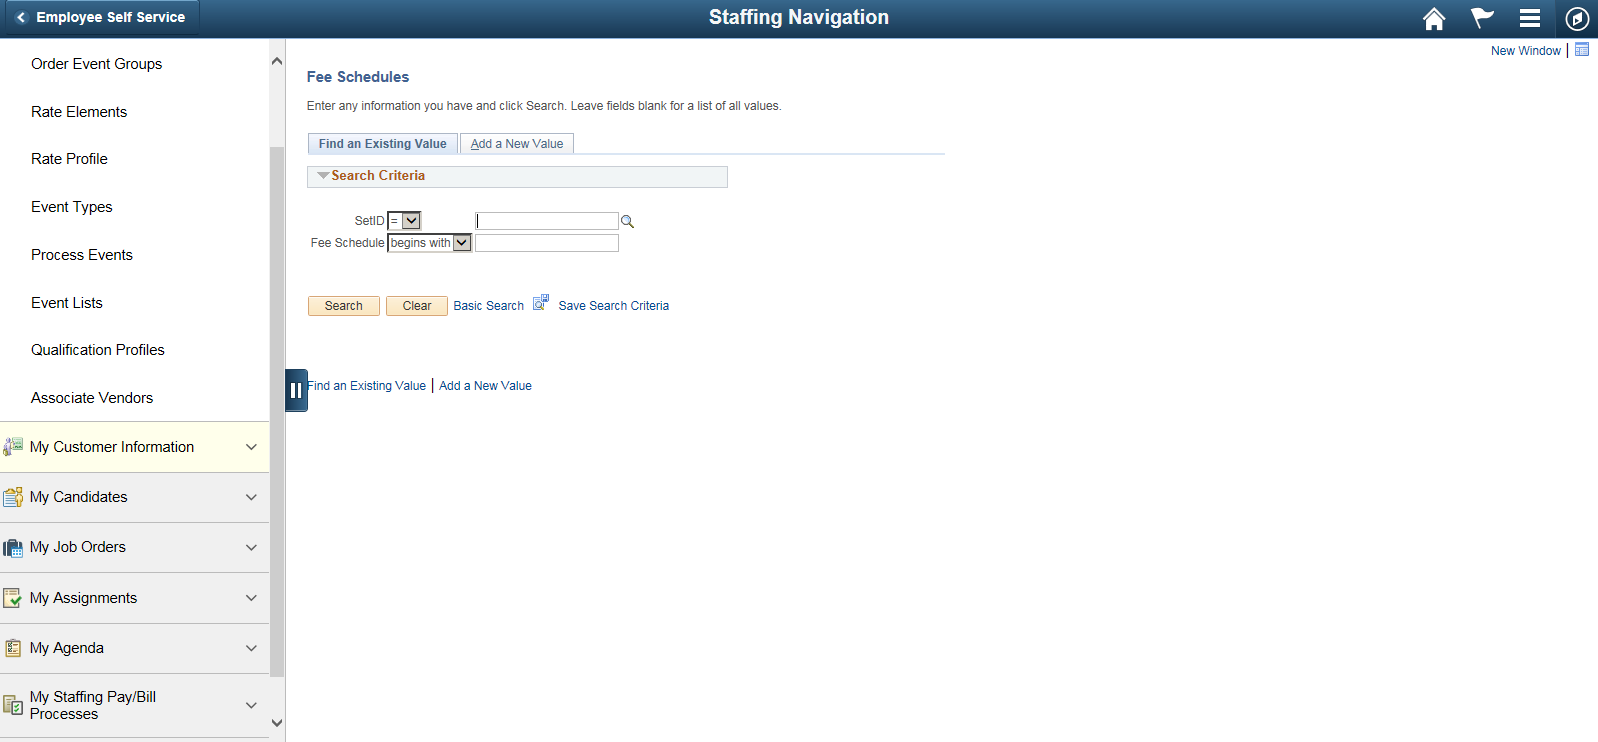 Staffing Navigation Collections page